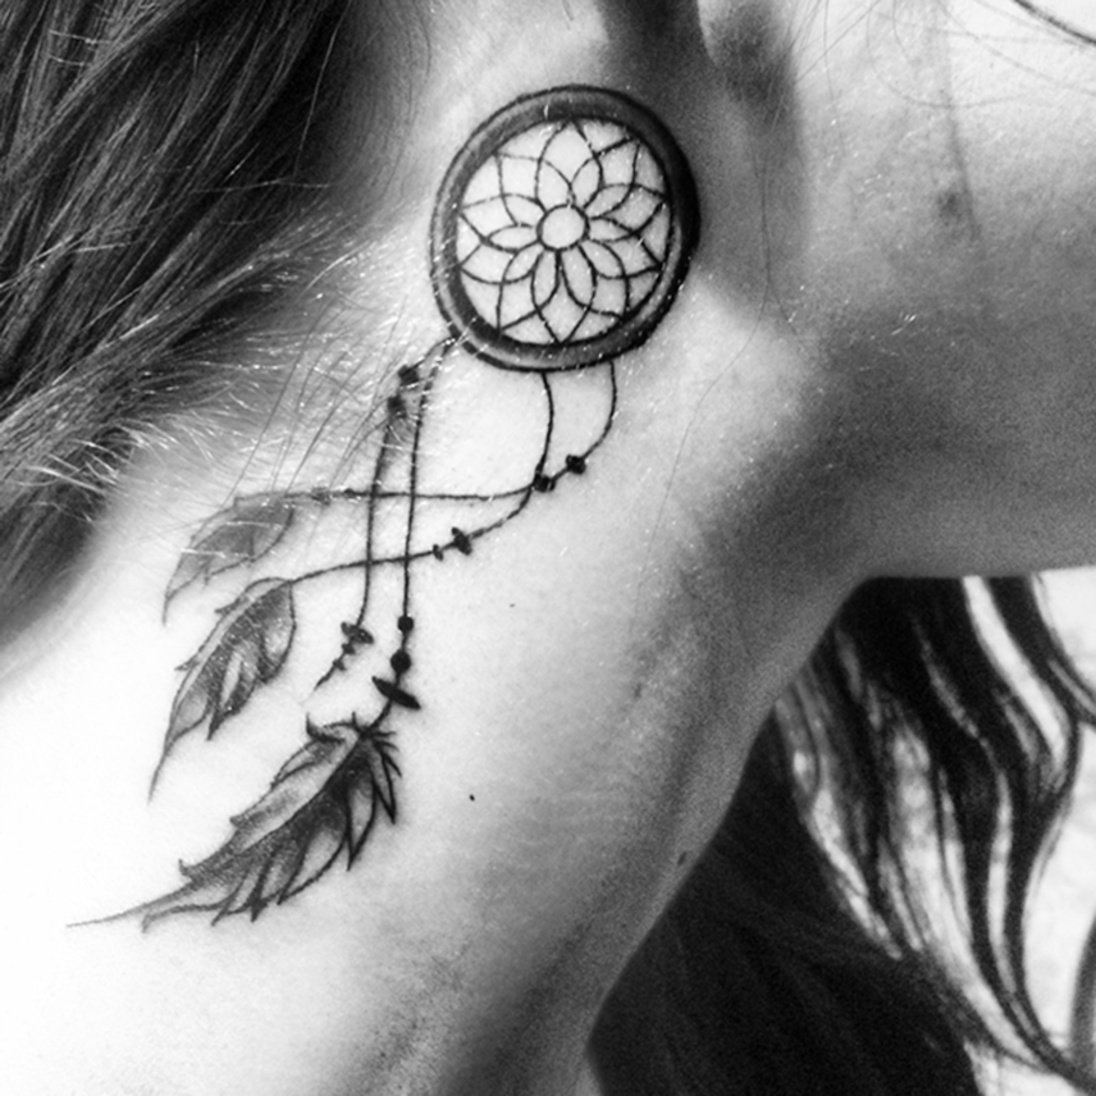 Whether or not you believe in the power of these tattoos, there's no denying how cool they look. If you're looking for something different than the usual, then this dream catcher tattoo might be a great option for you.